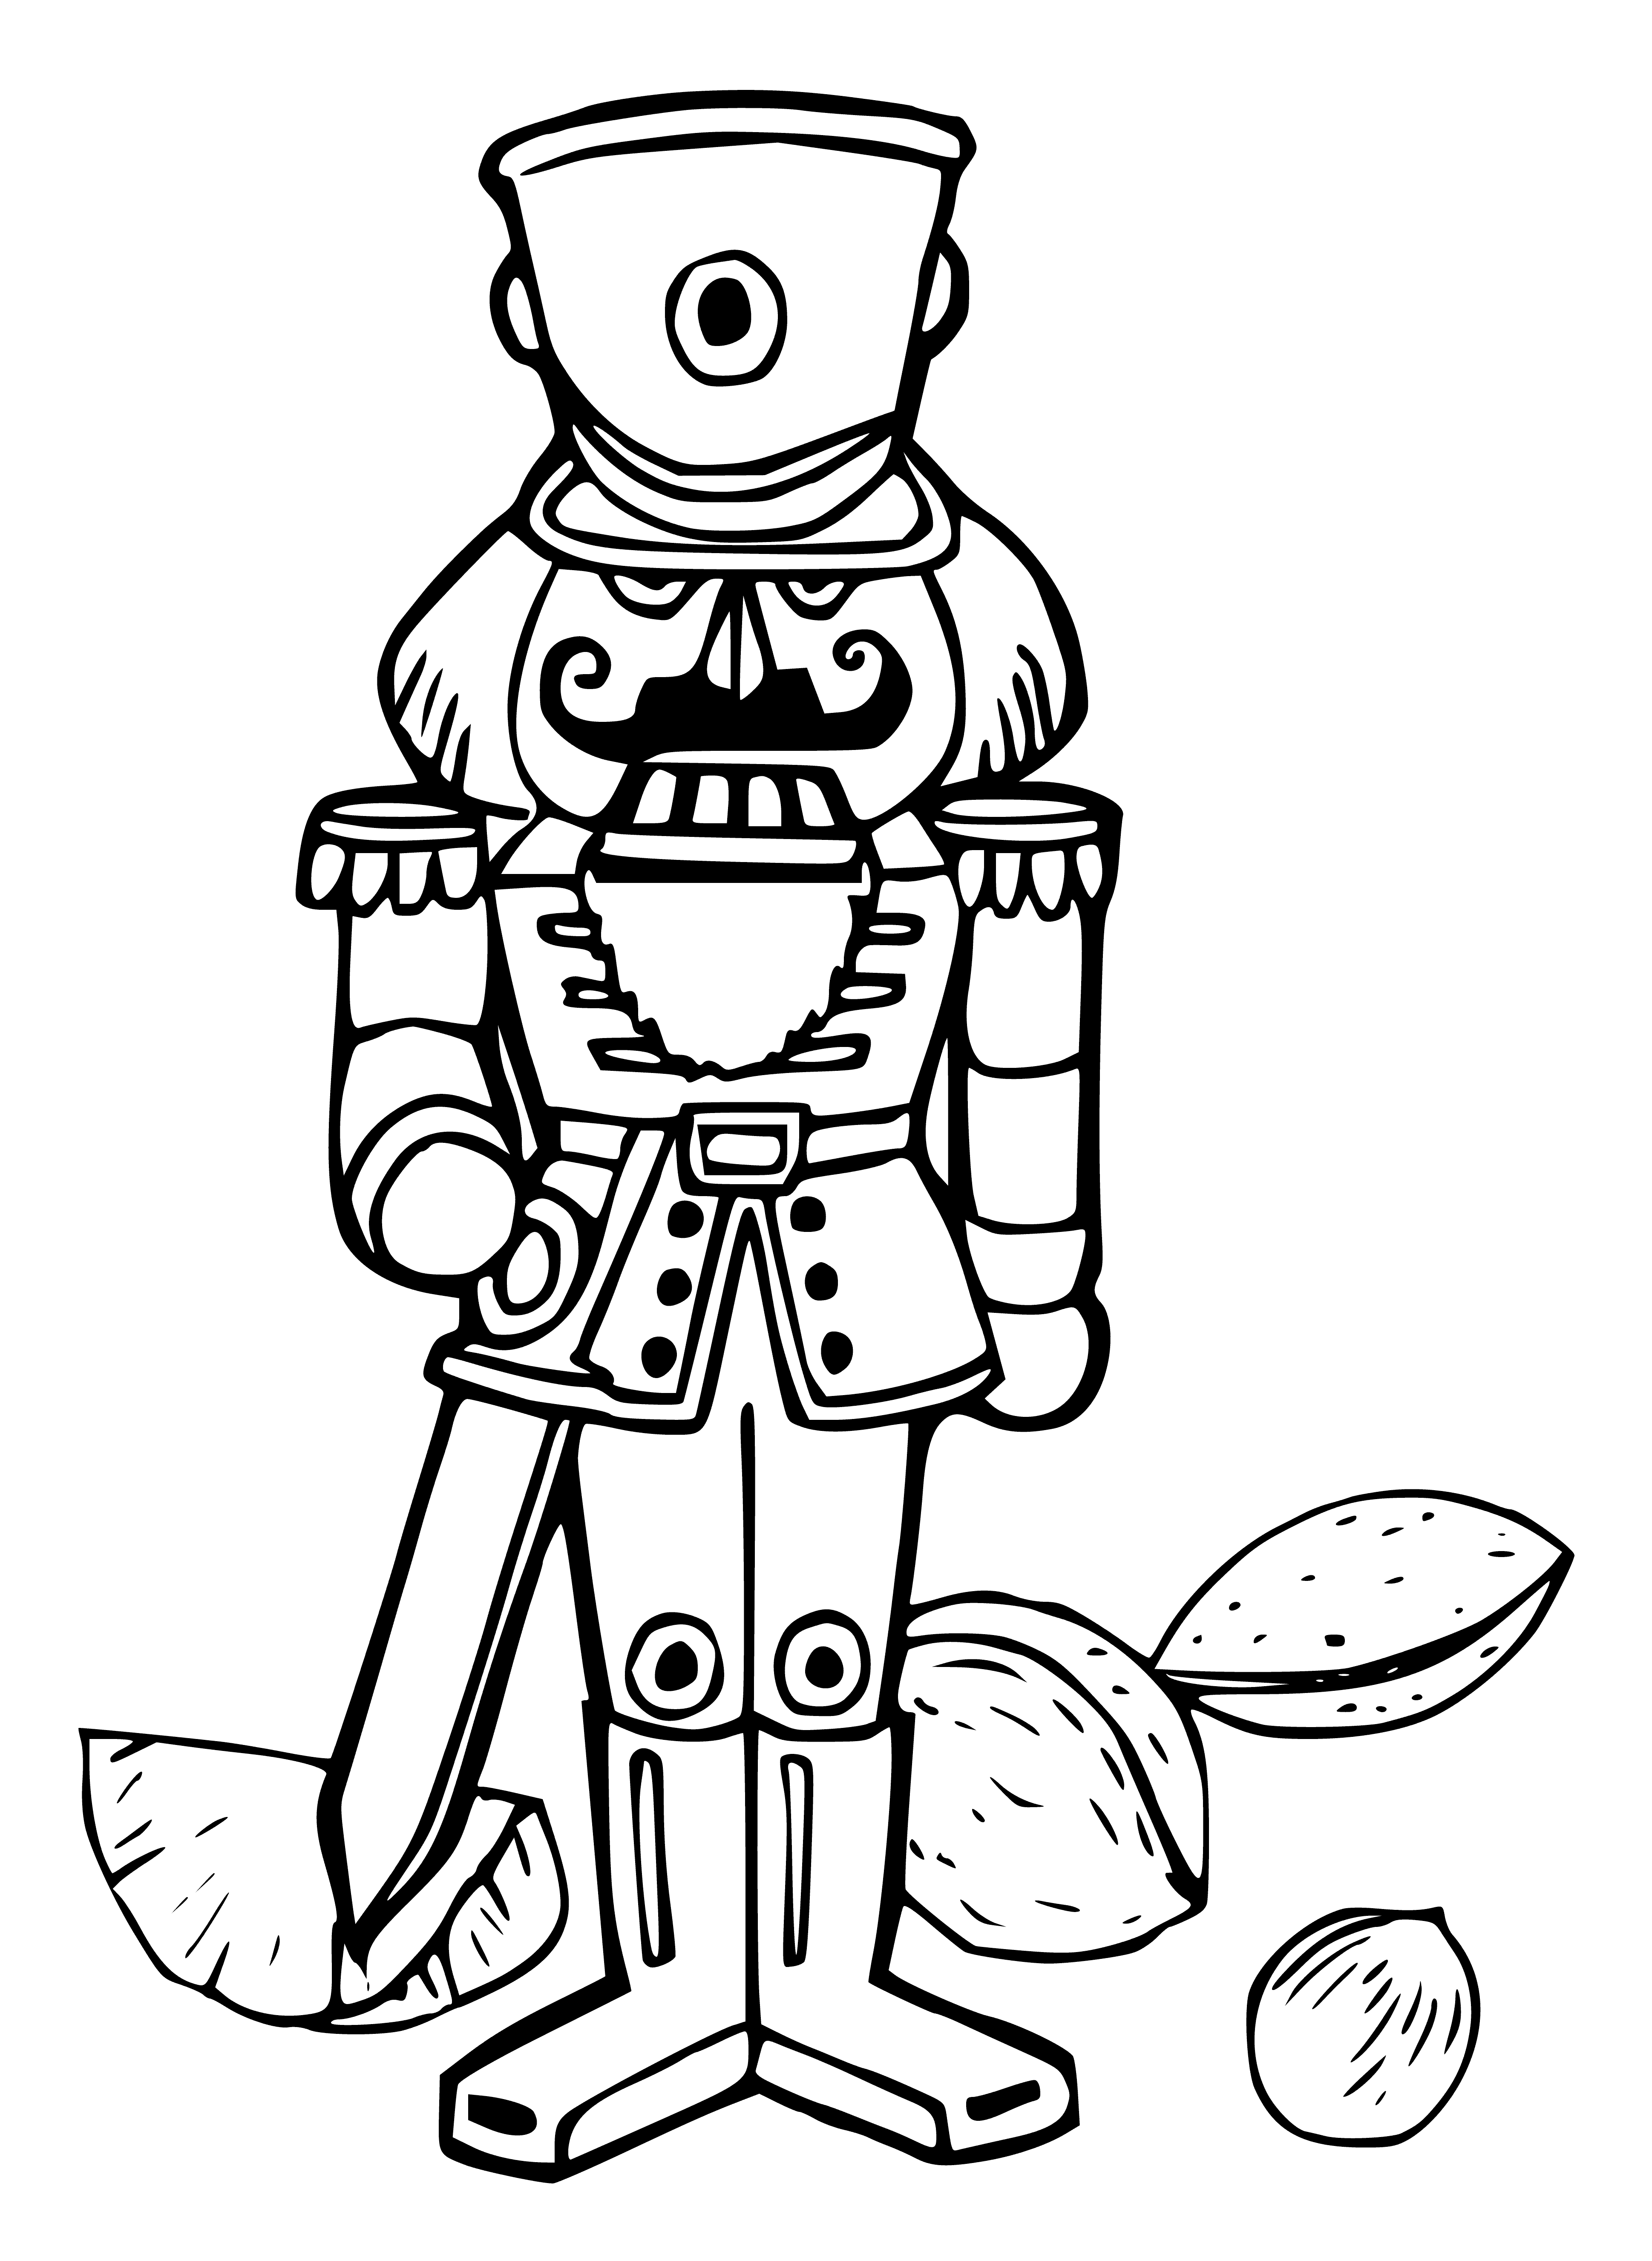 coloring page: Girl Marie given nutcracker doll by godfather. Doll comes to life and protects her from Mouse King. Set in Christmas season.